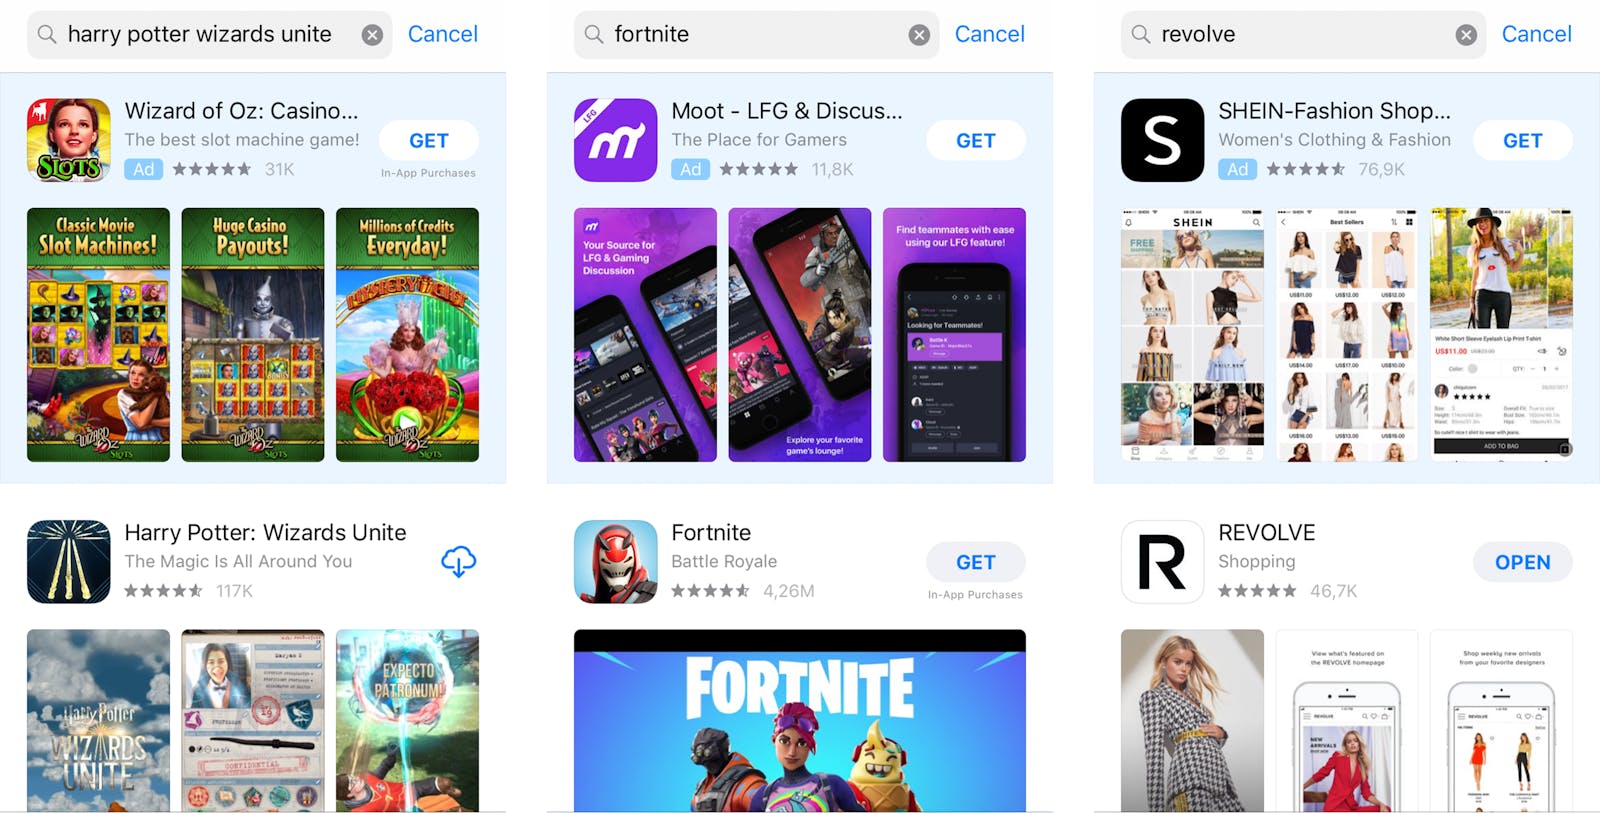 Apple Search Ads examples on the App Store